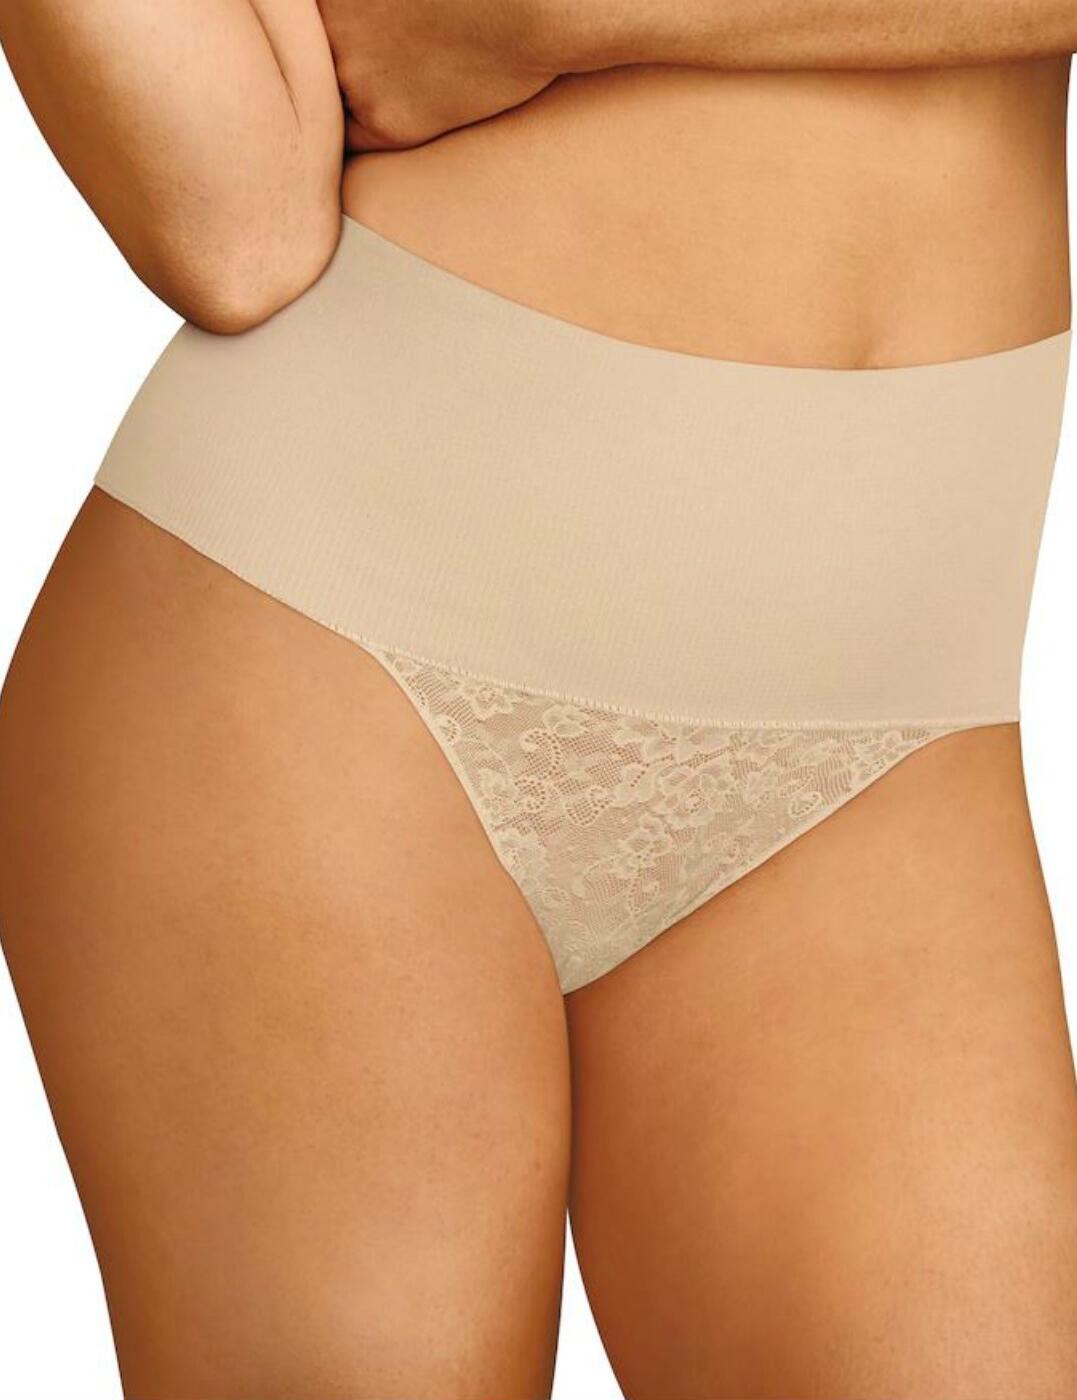 DM0049 Maidenform Tame Your Tummy Lace Thong - DM0049 Nude